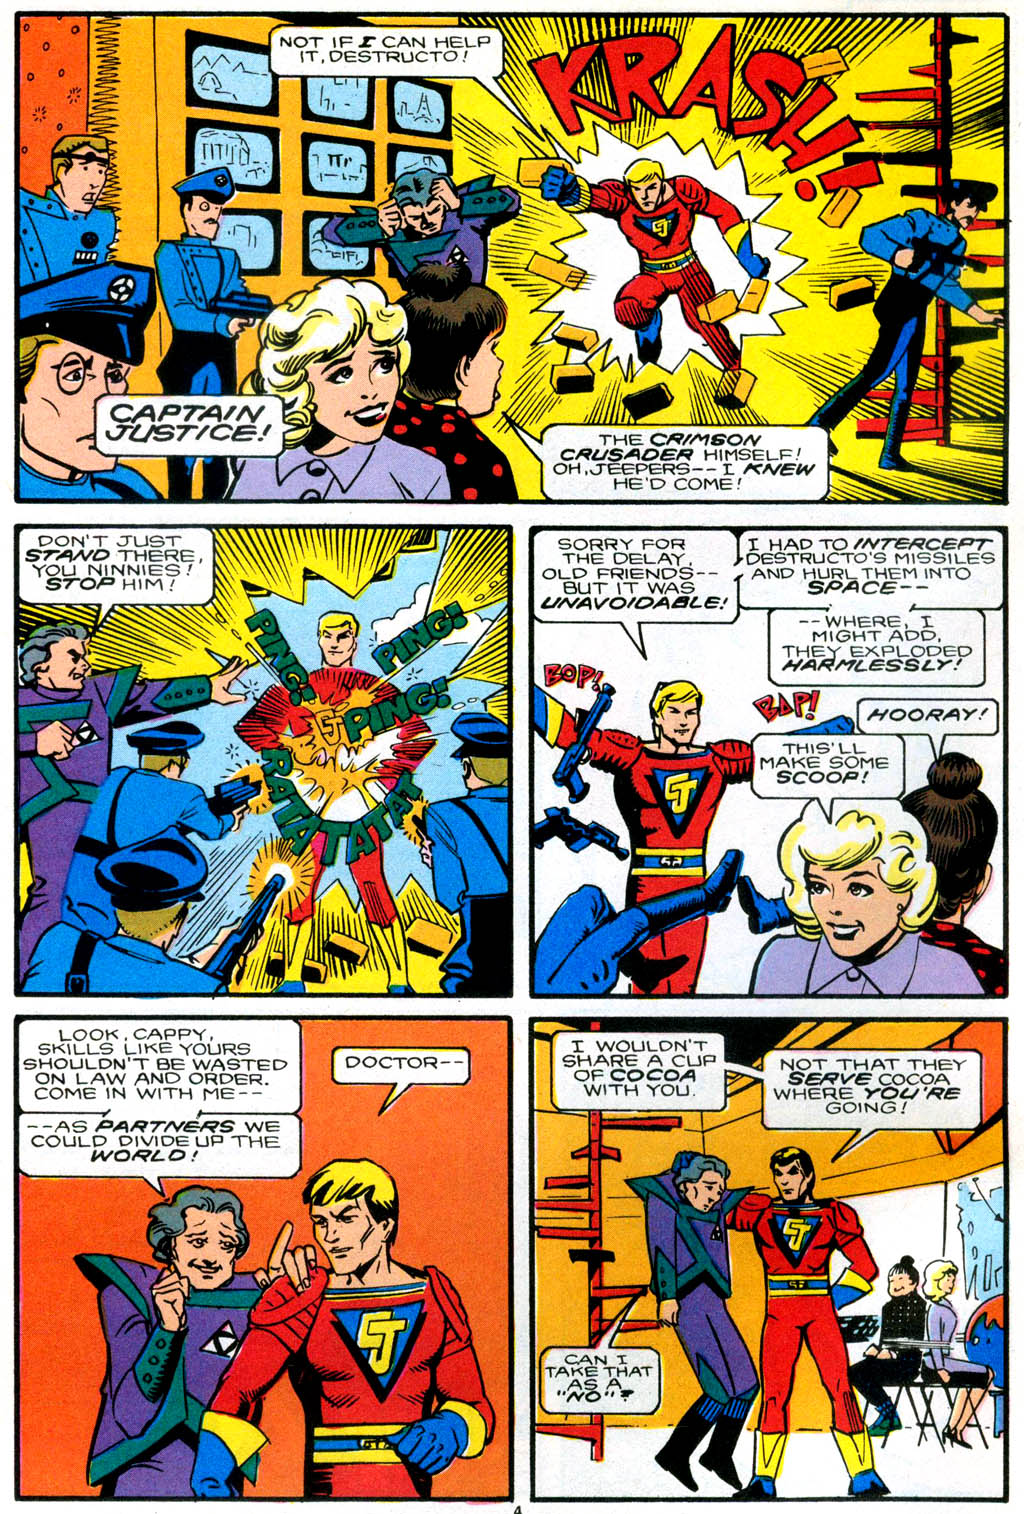 Captain Justice 1 Page 4